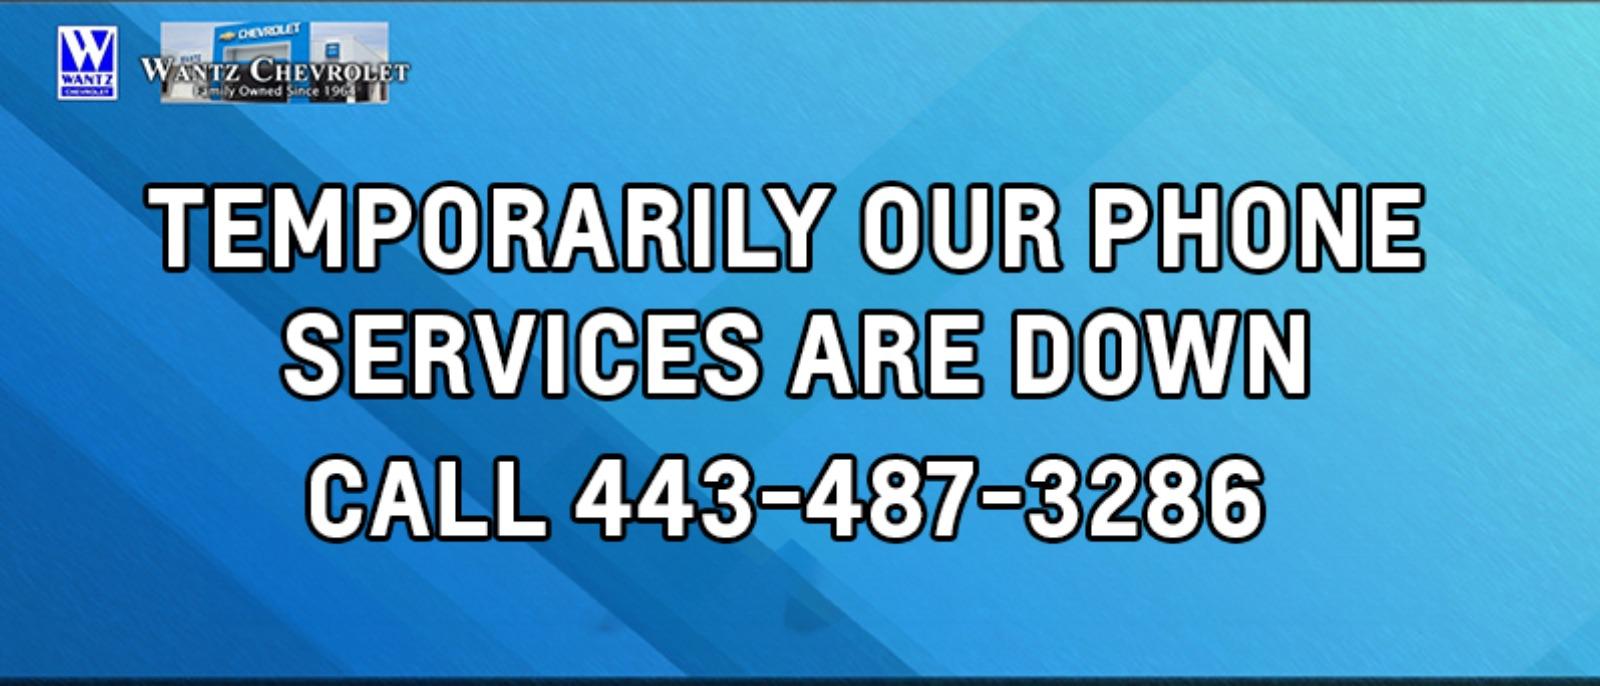 Temporarily our phone services are down. Call 410-259-4032